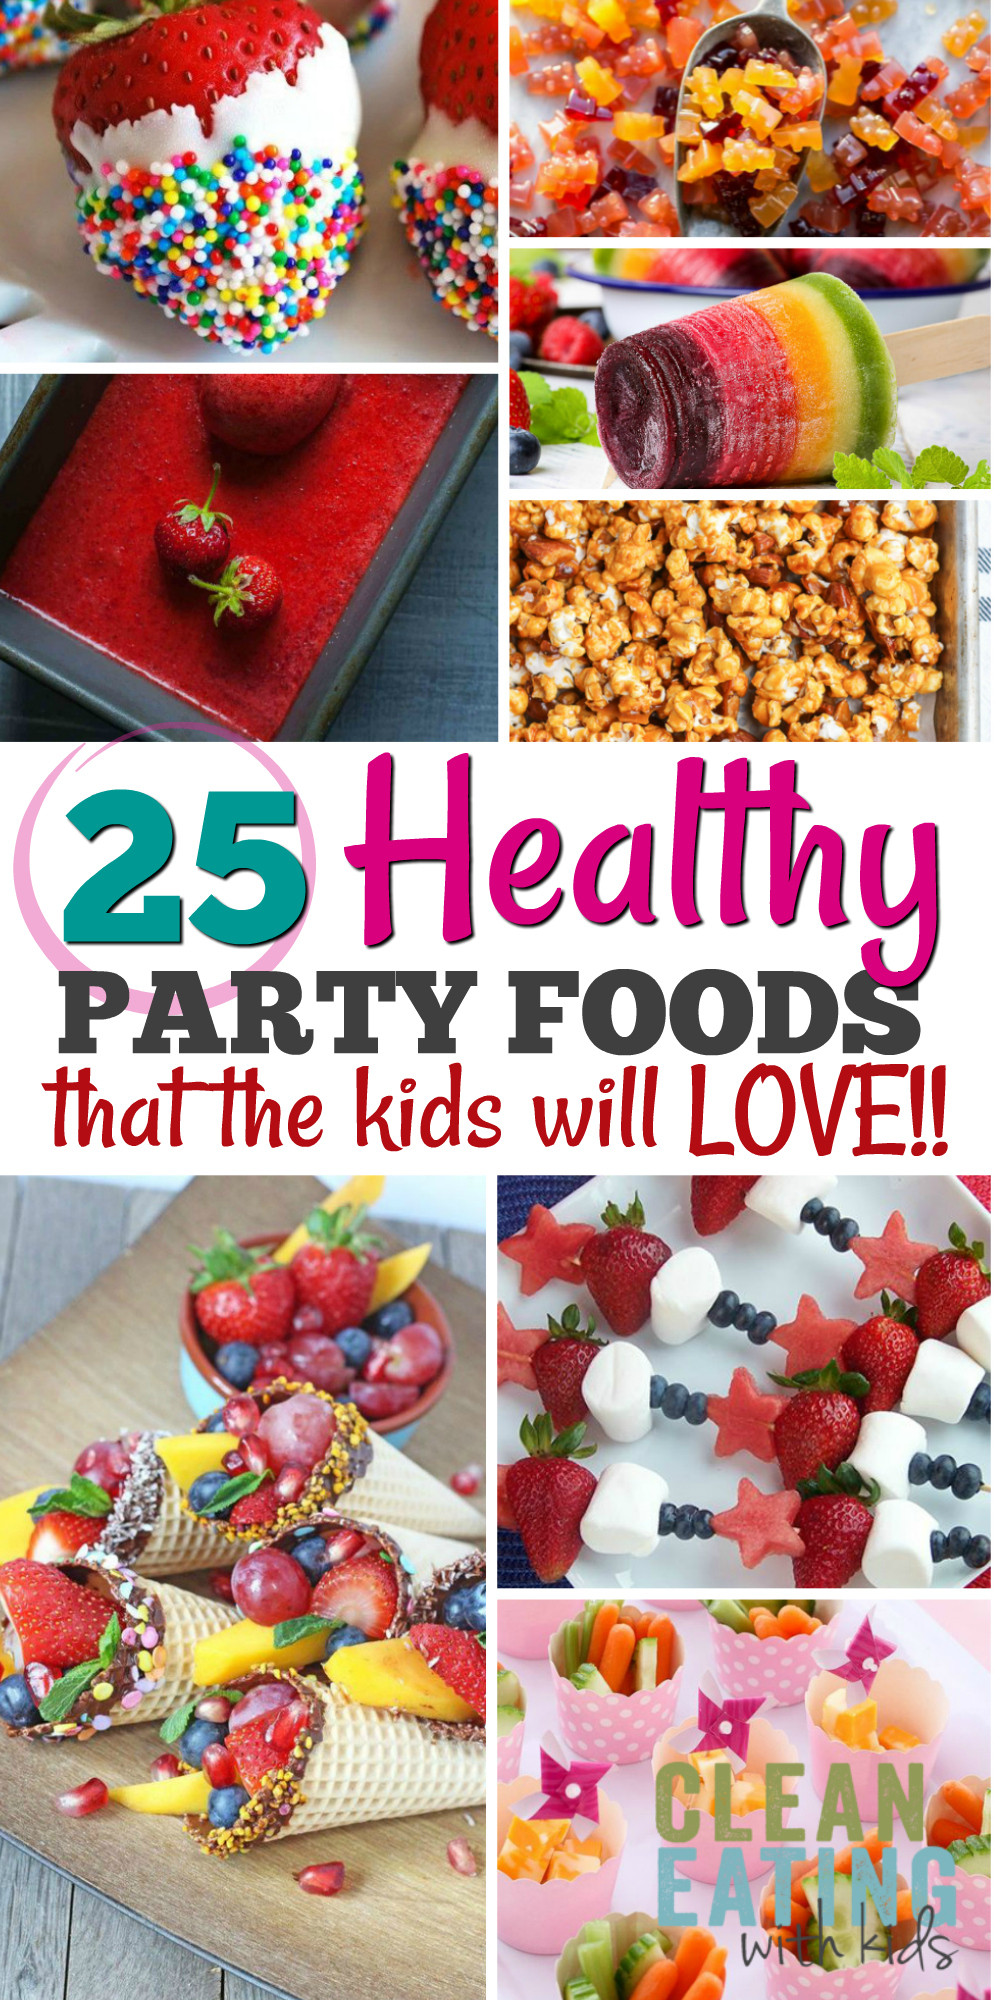 Party Food Ideas
 25 Healthy Birthday Party Food Ideas Clean Eating with kids